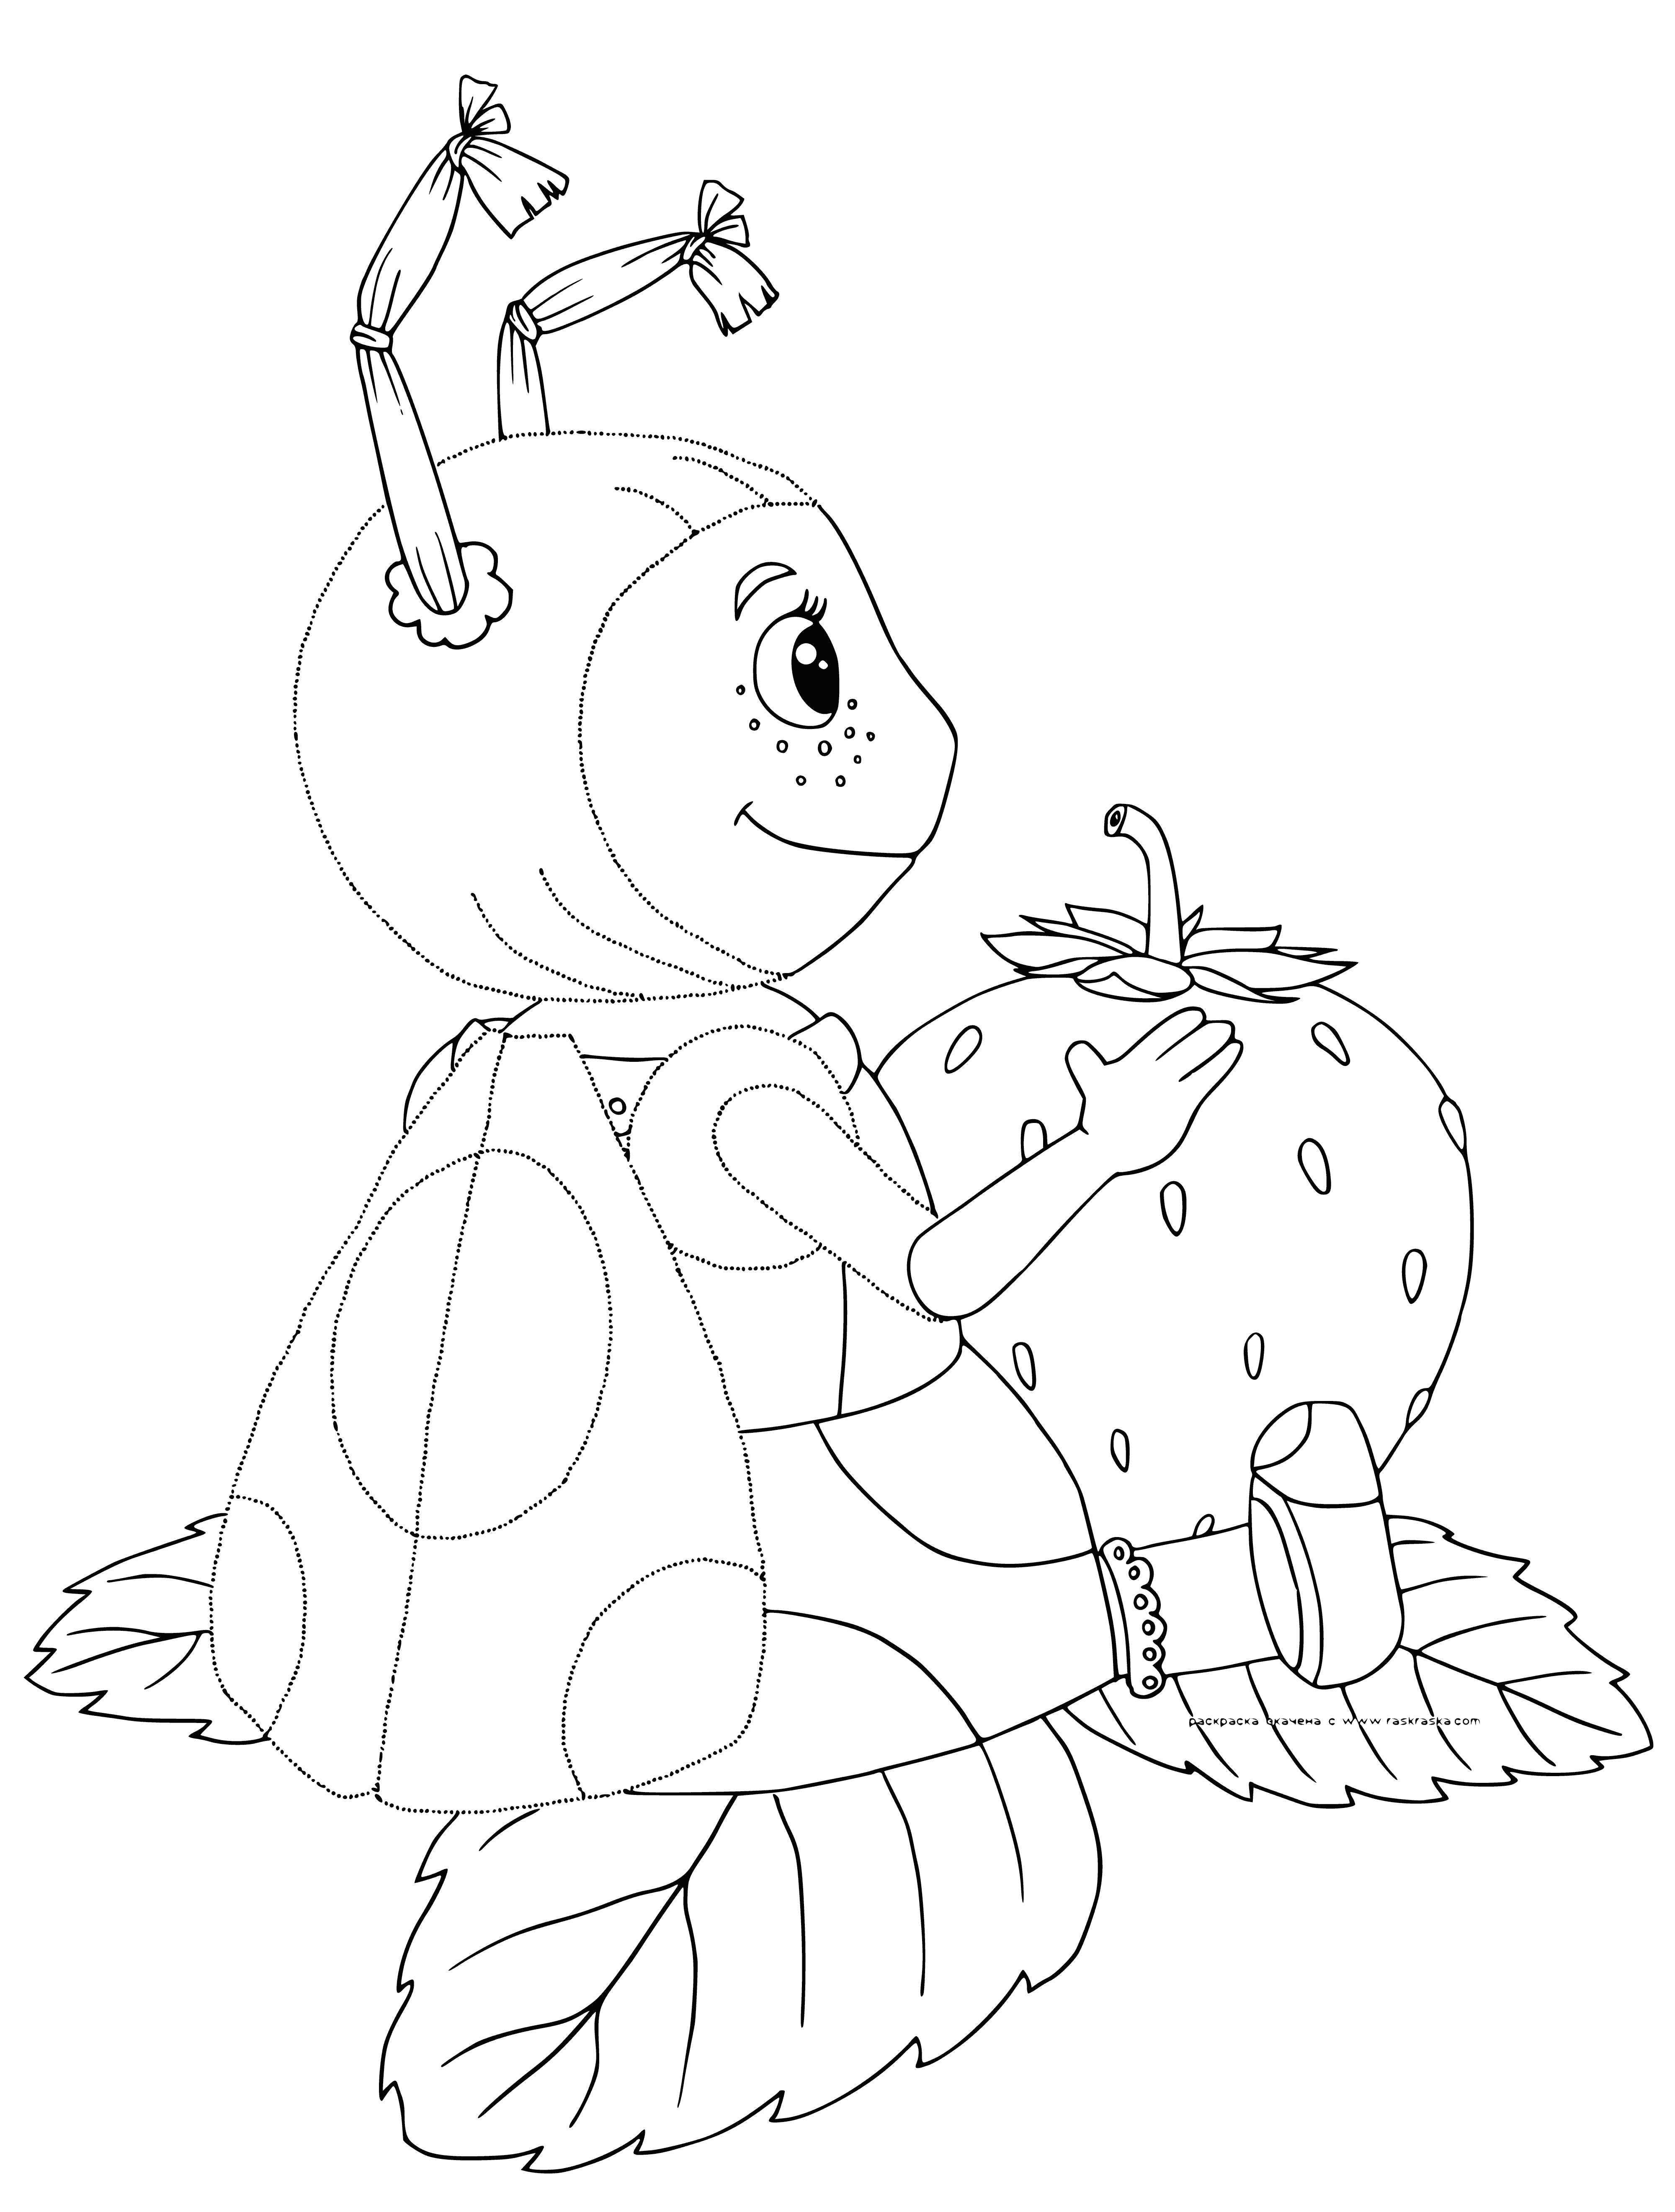 coloring page: Luntik and Mila are in a strawberry field. Luntik has a basket, while Mila is enjoying one. #StrawberryPicking